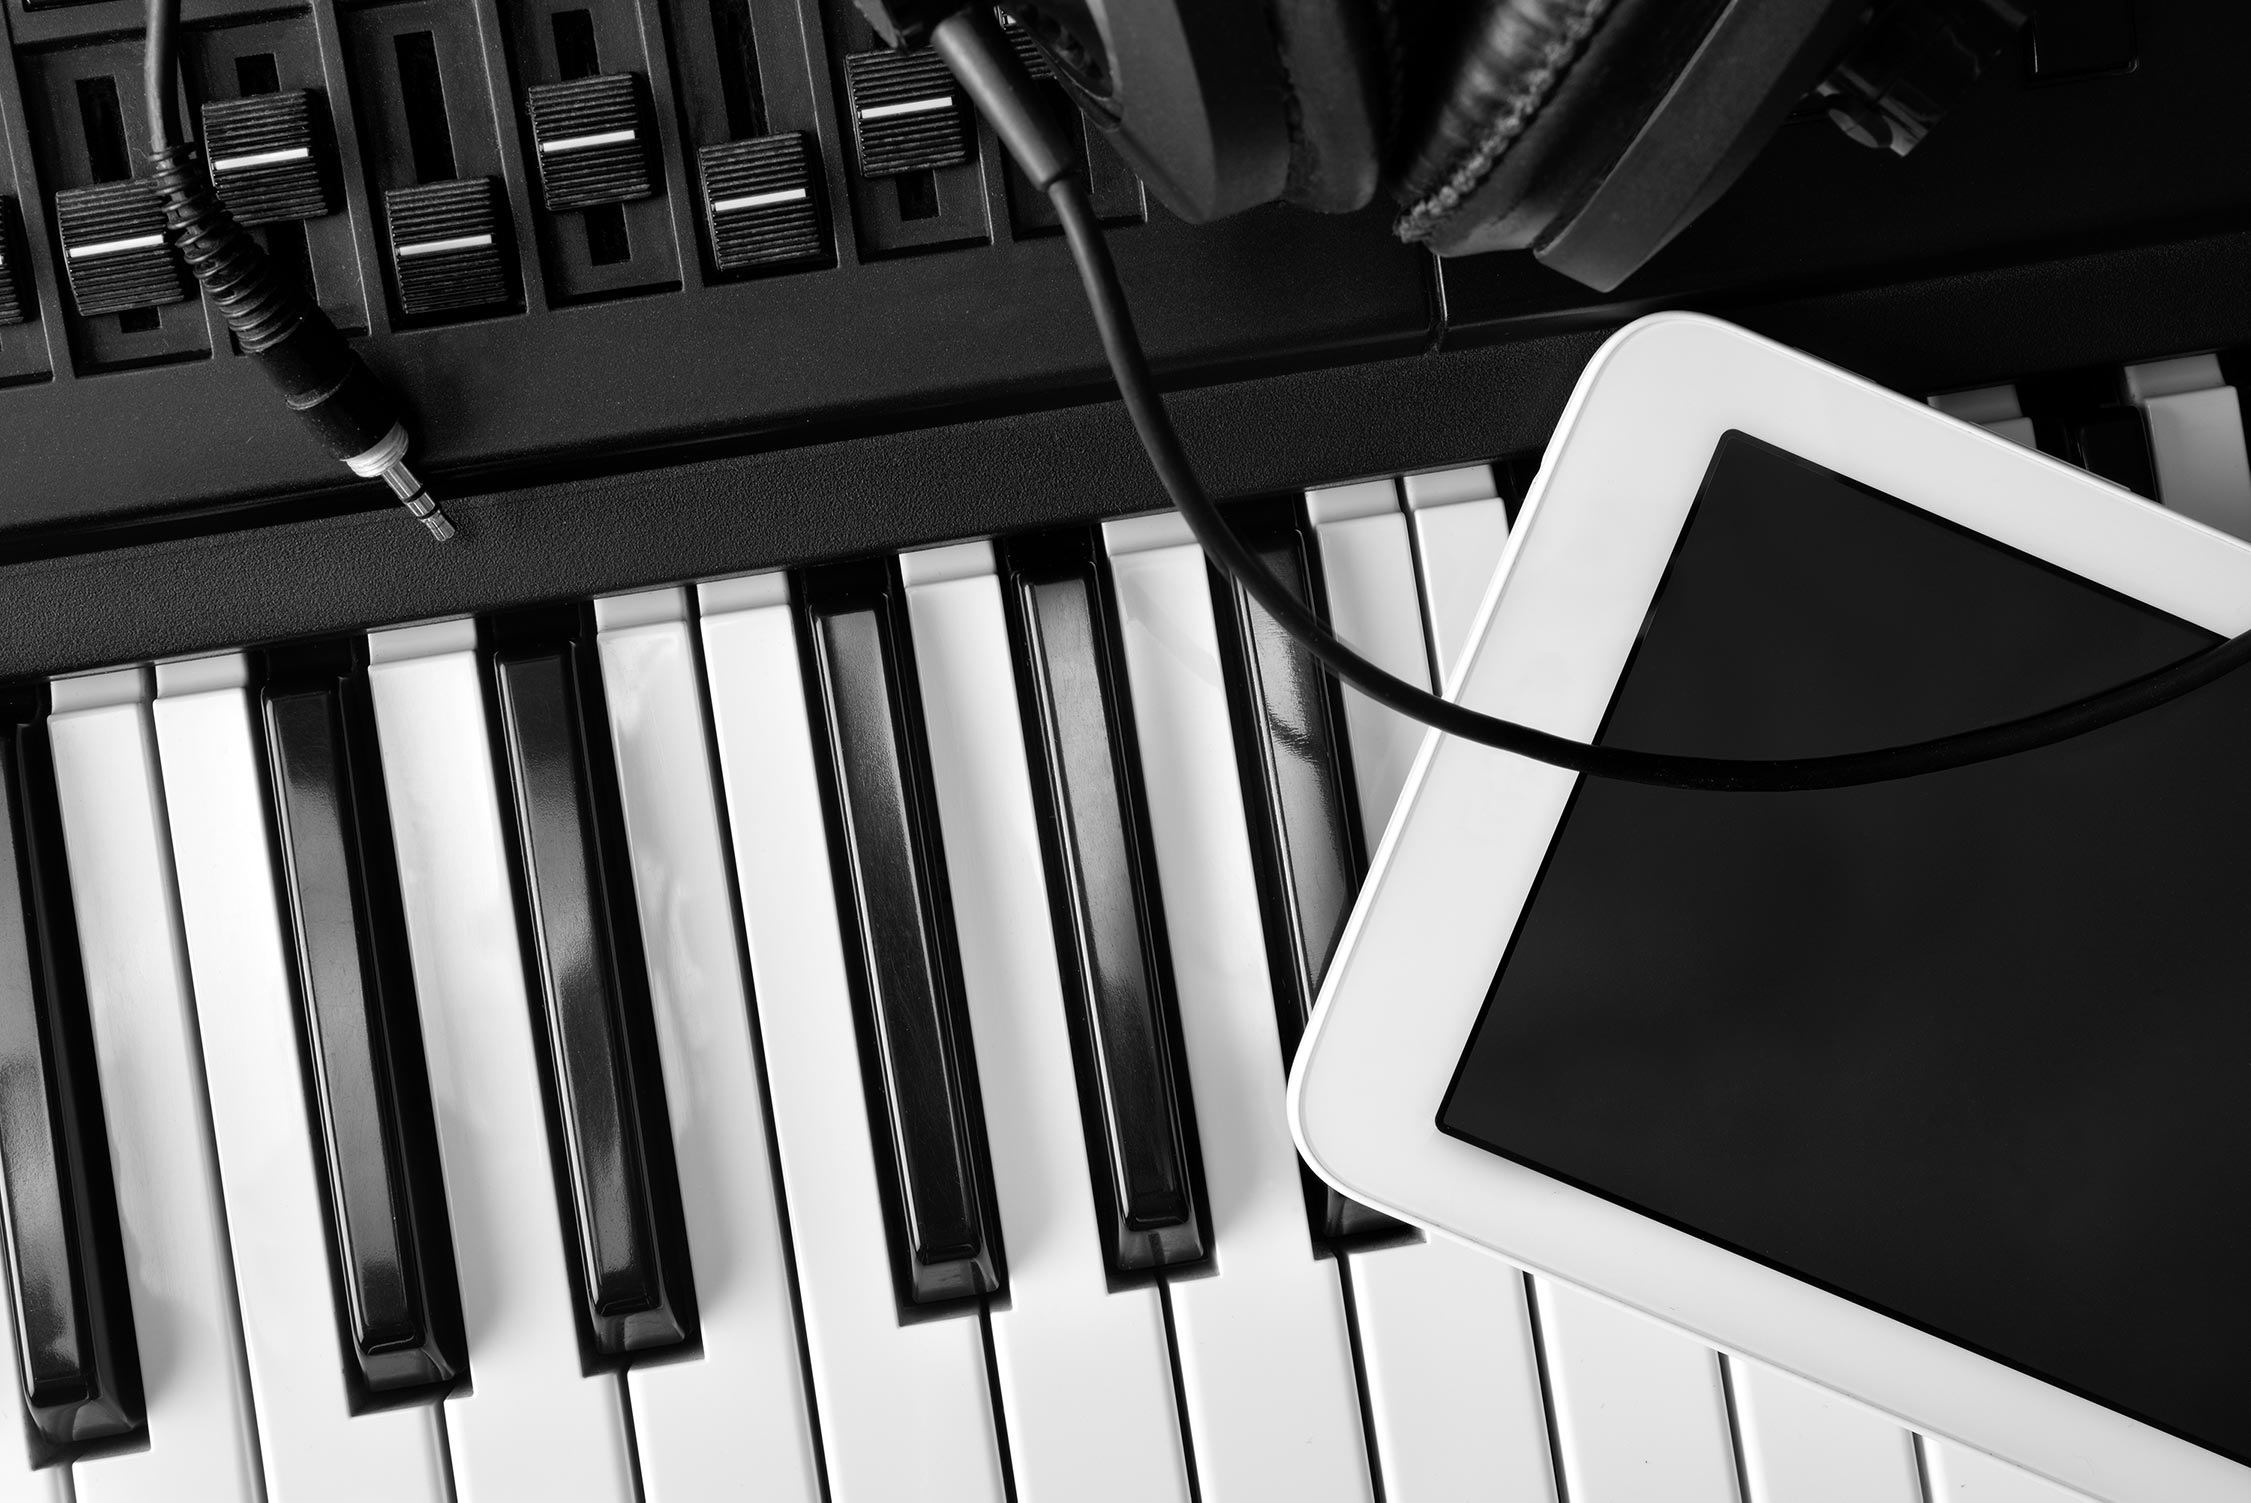 keyboard-tablet-mixer-bw Home | Smooth Chords | Music instruction videos